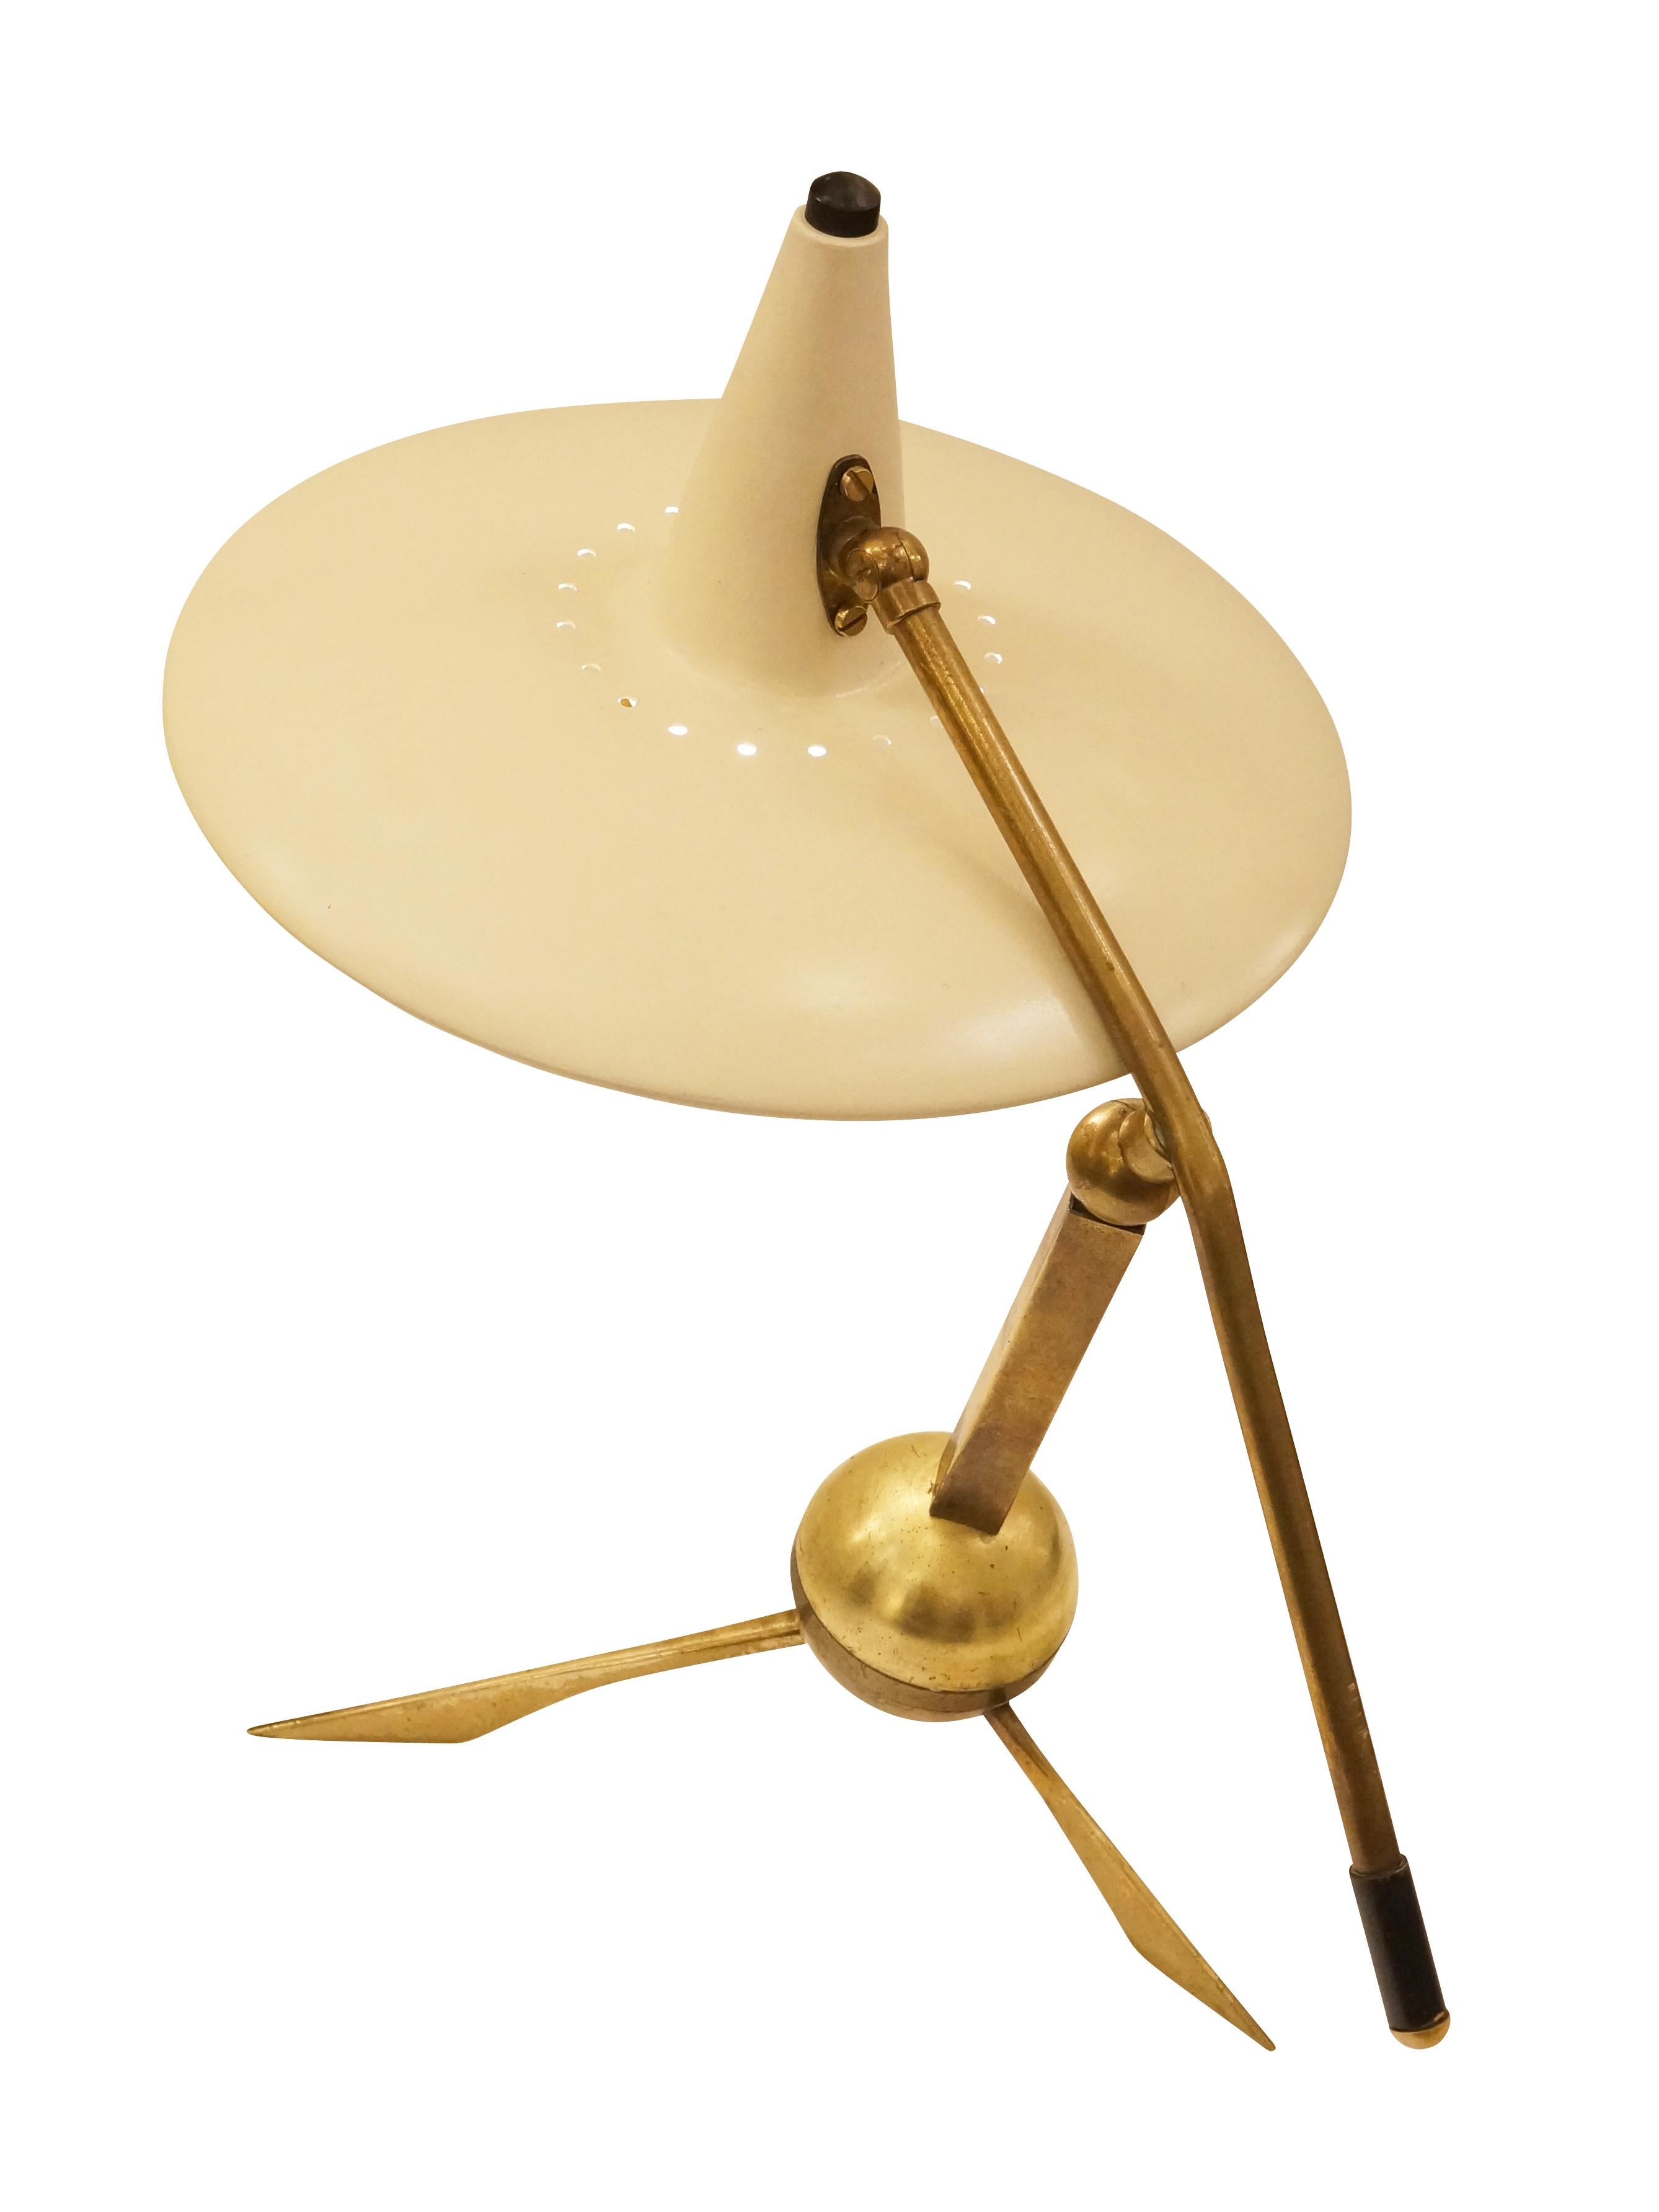 Charming Italian Mid-Century table lamp with an adjustable off-white shade and brass framing.

Condition: Excellent vintage condition, minor wear consistent with age and use.

Width: 10”

Depth: 13”

Height: 14.5”

Ref#: LTZ2023

